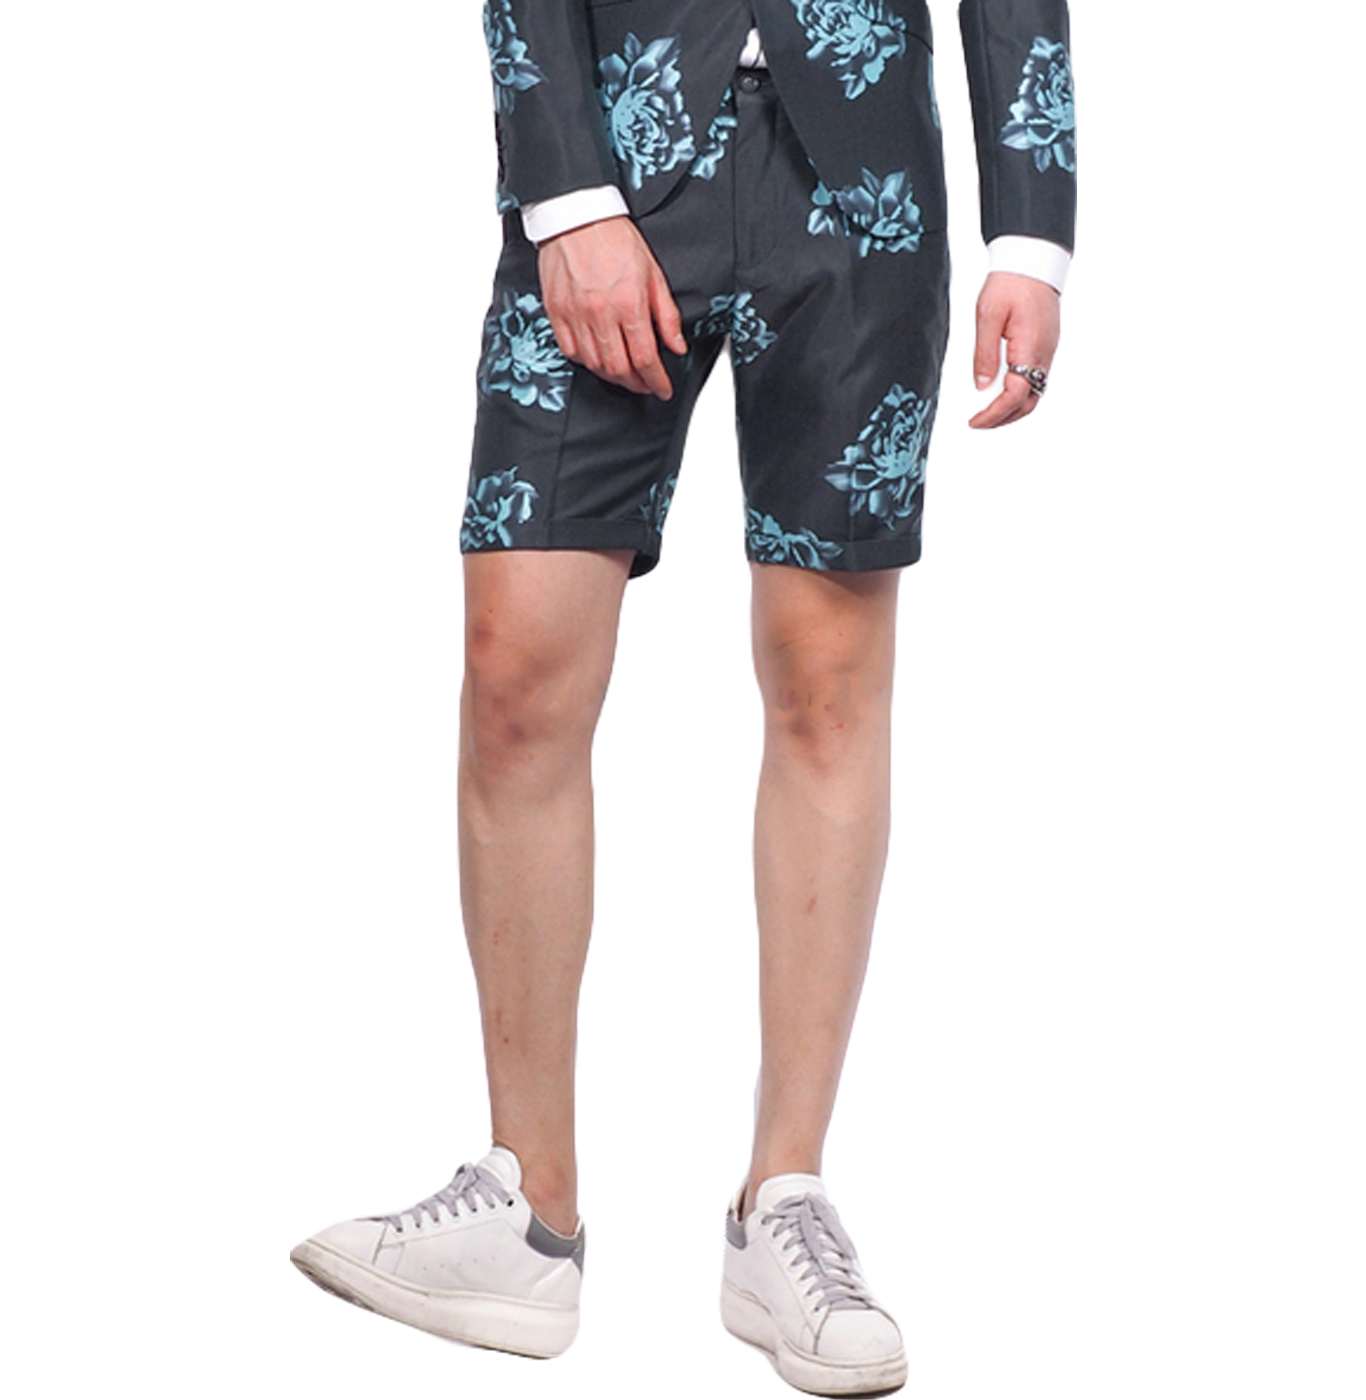 Fashionable Navy Blue Bright Floral Shorts